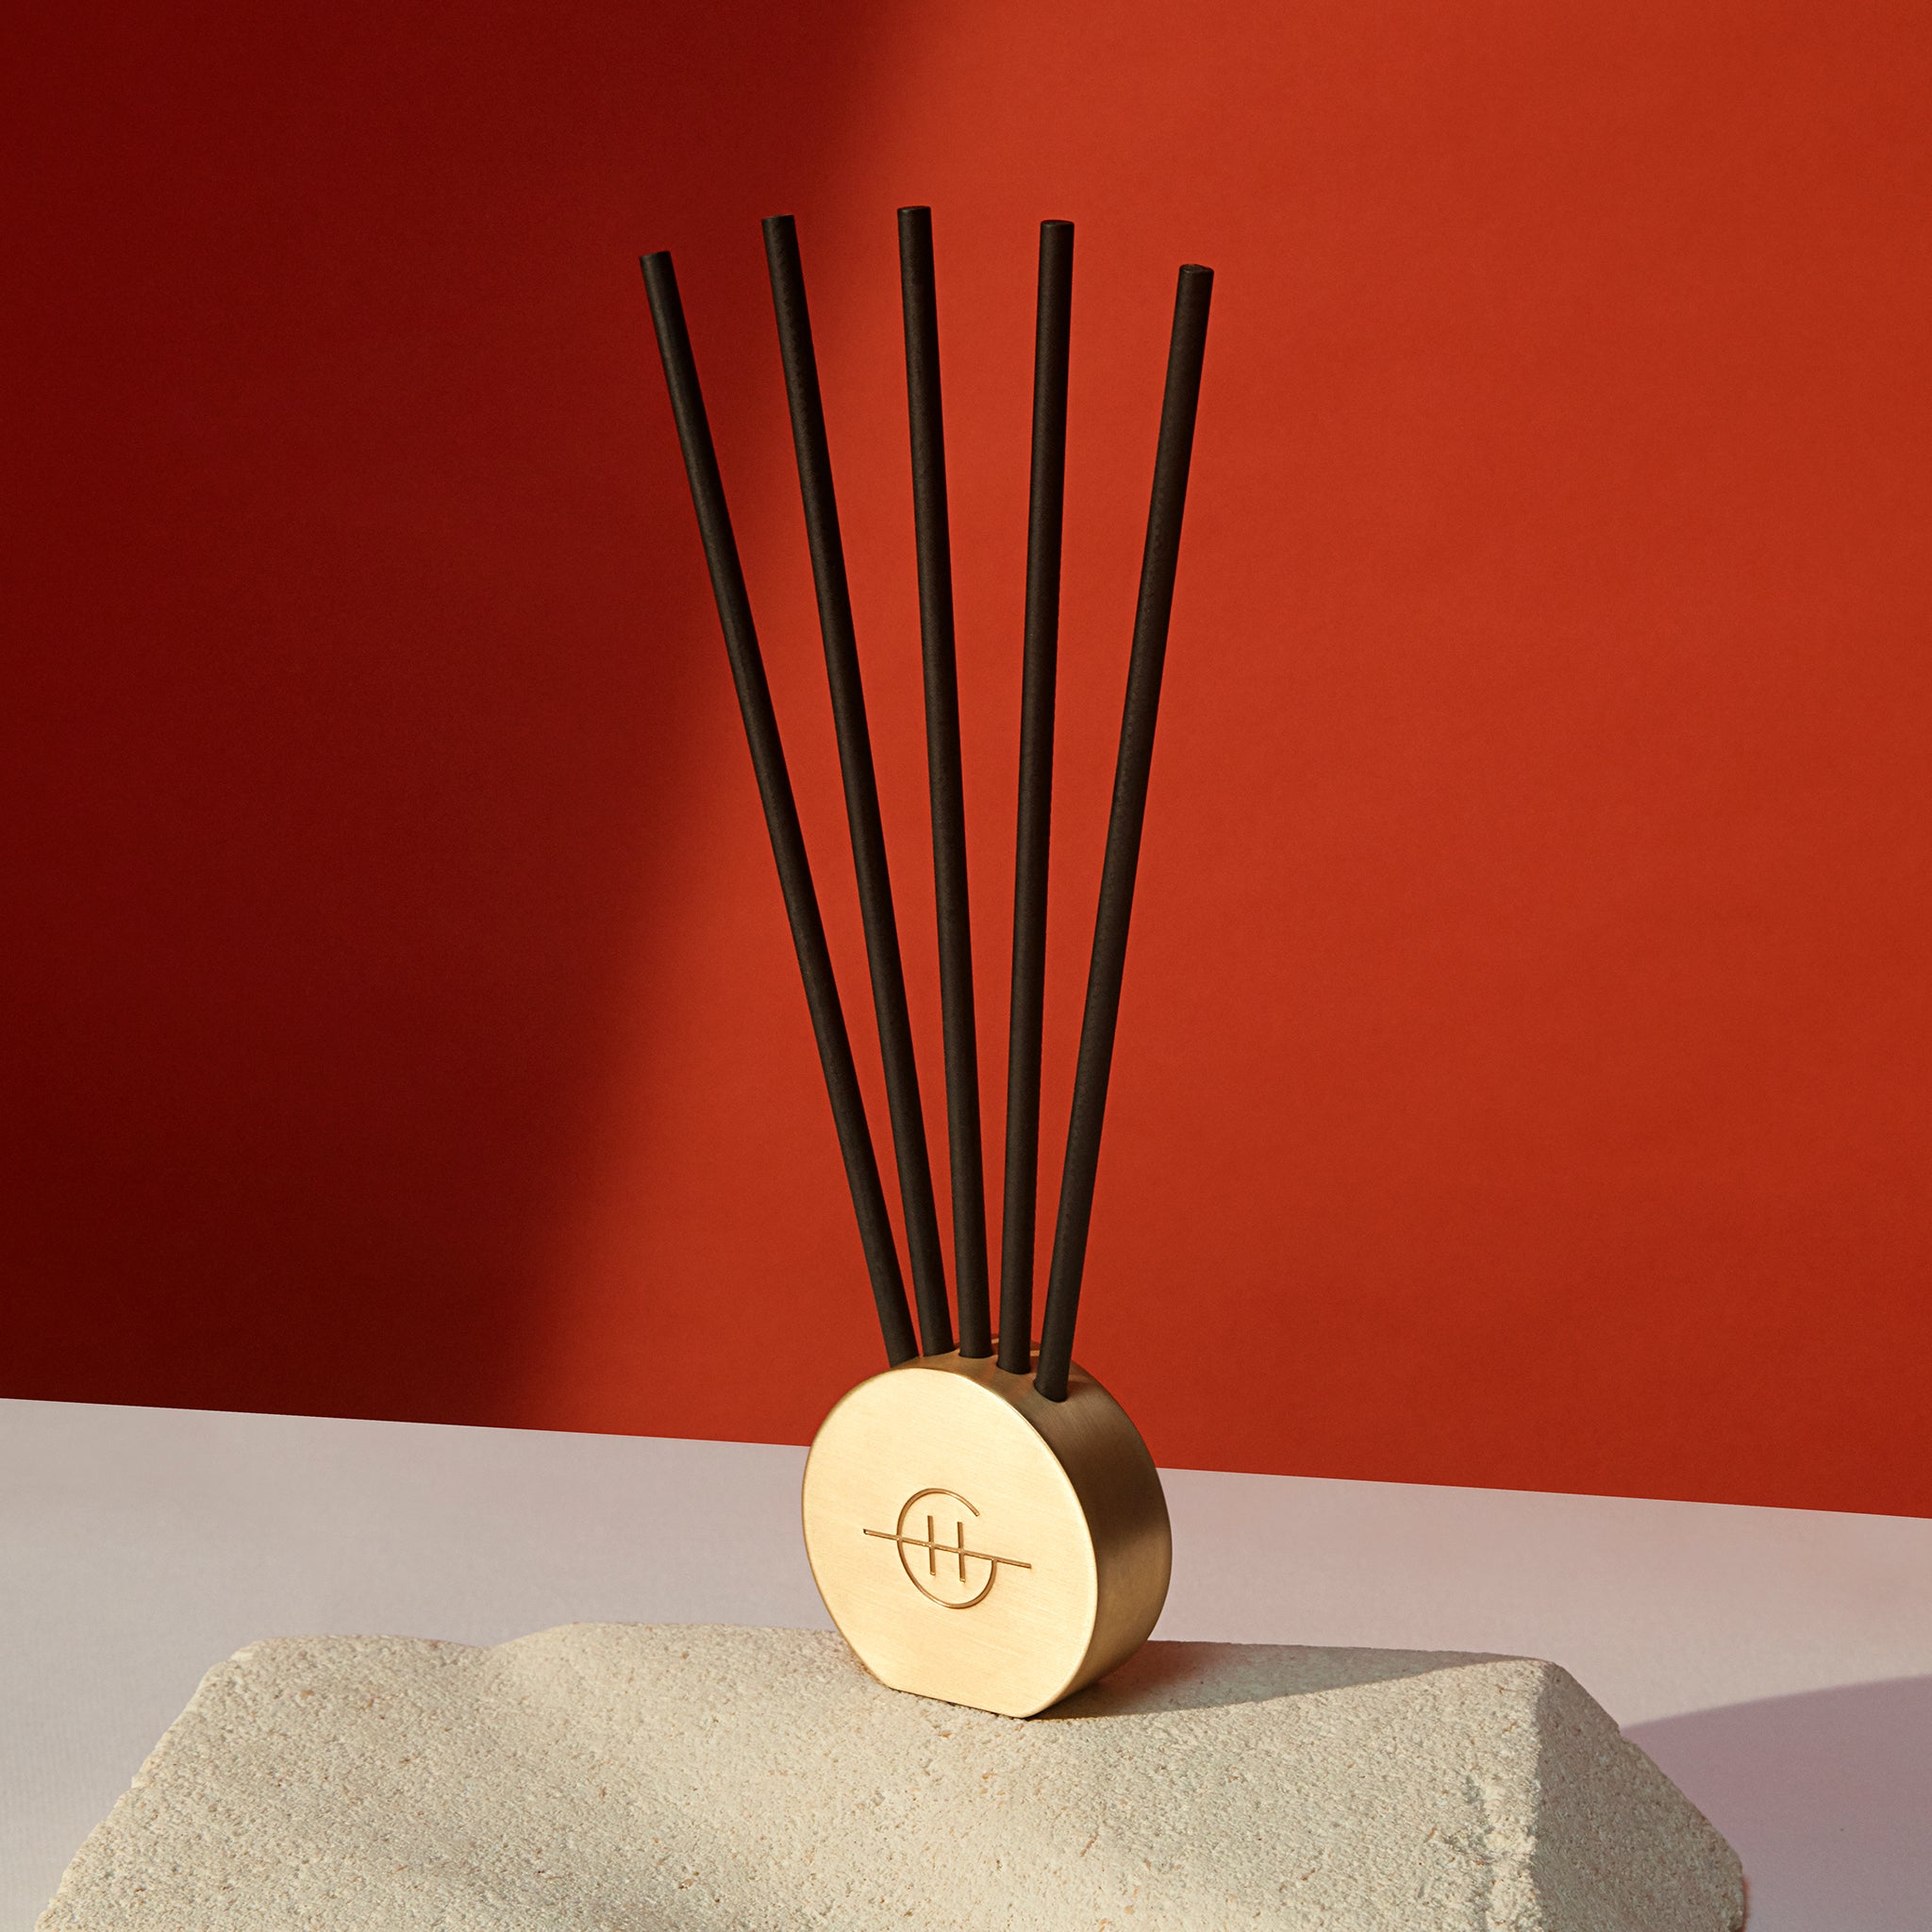 Glasshouse Fragrances Scent Stems™ in vessel on tabletop with red background